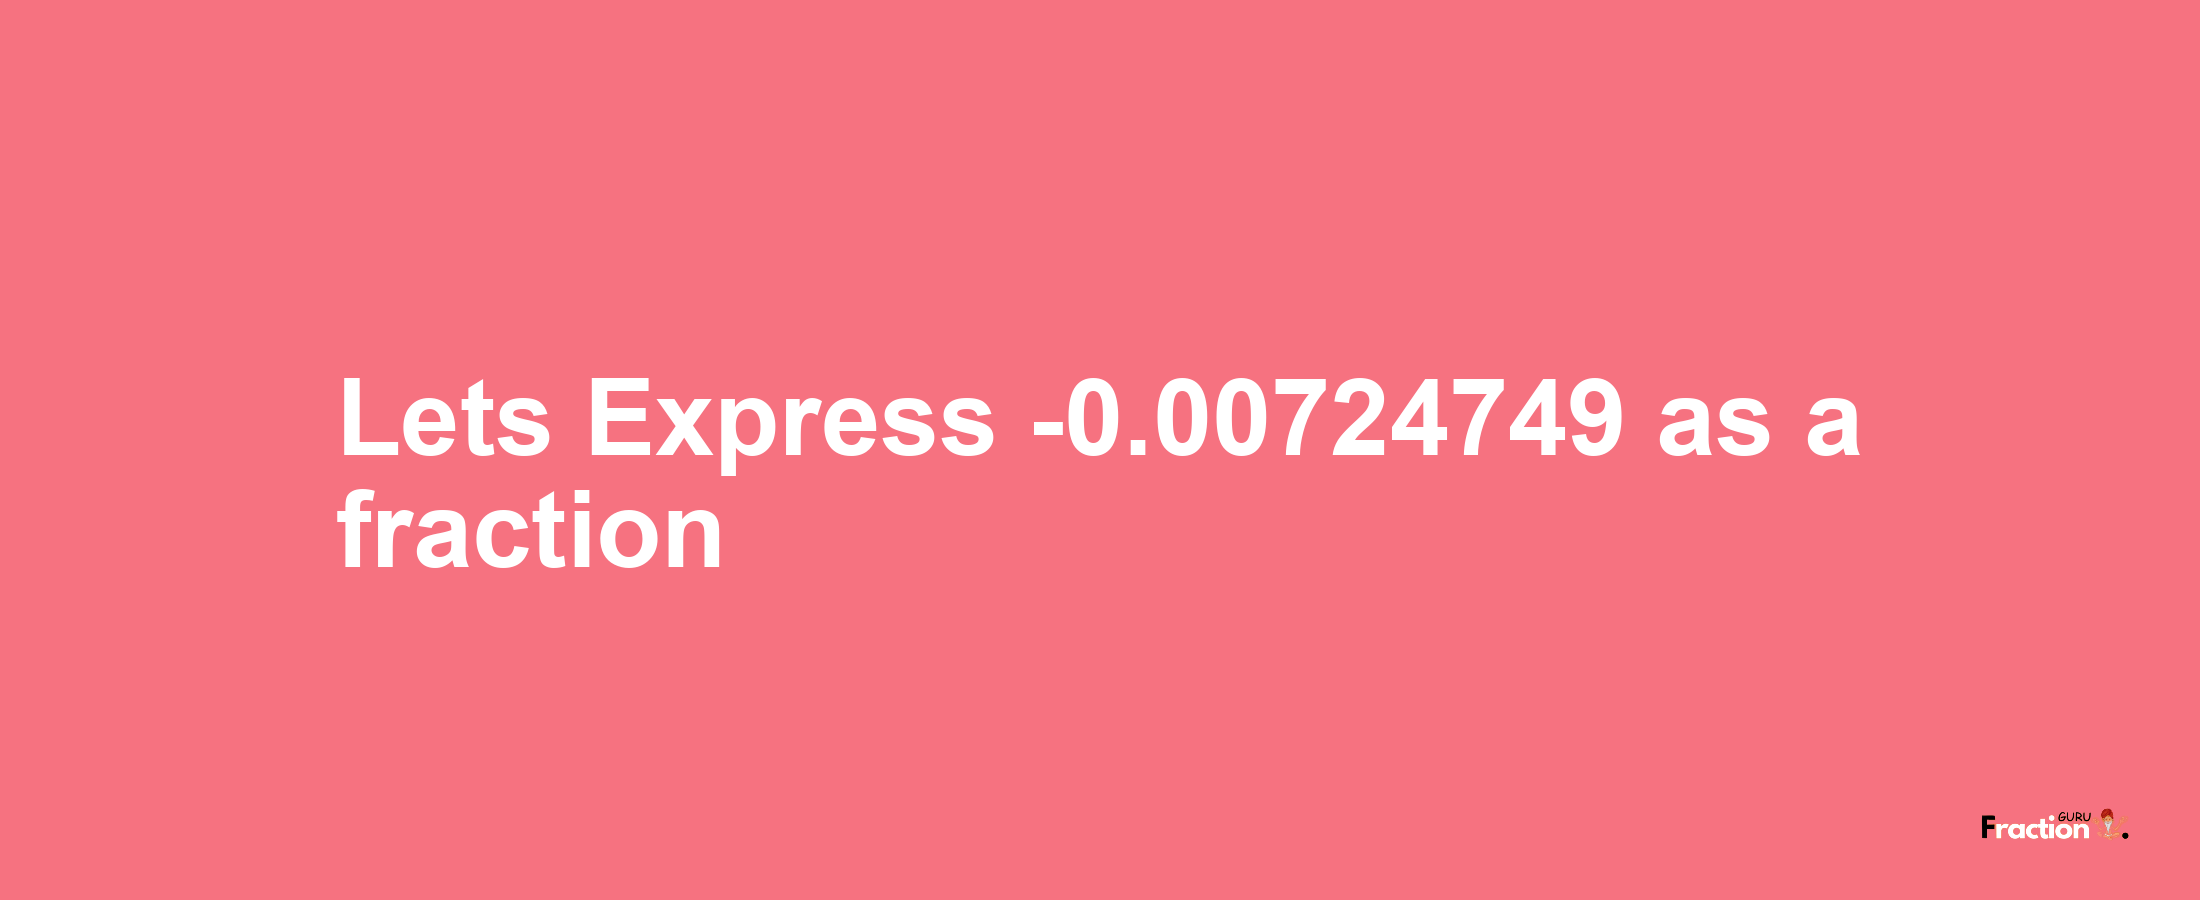 Lets Express -0.00724749 as afraction